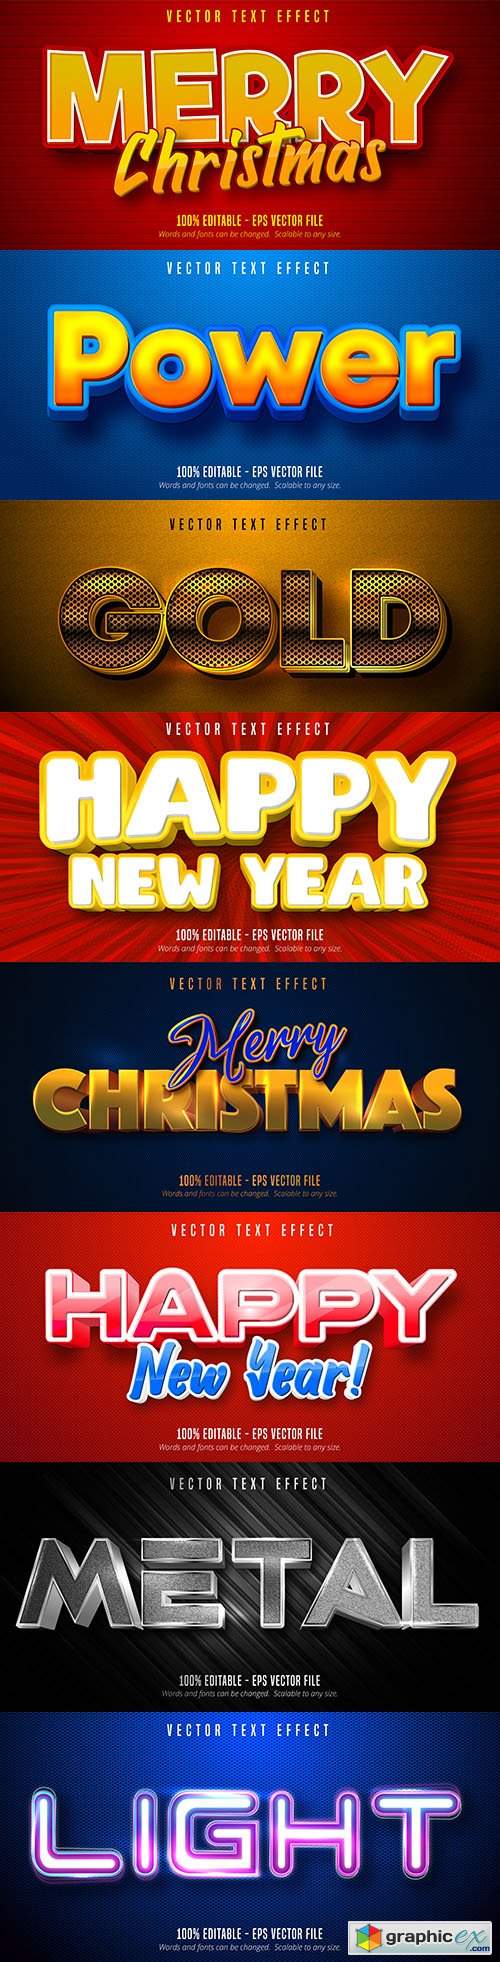  Merry Christmas editable font effect text collection illustration design 2 